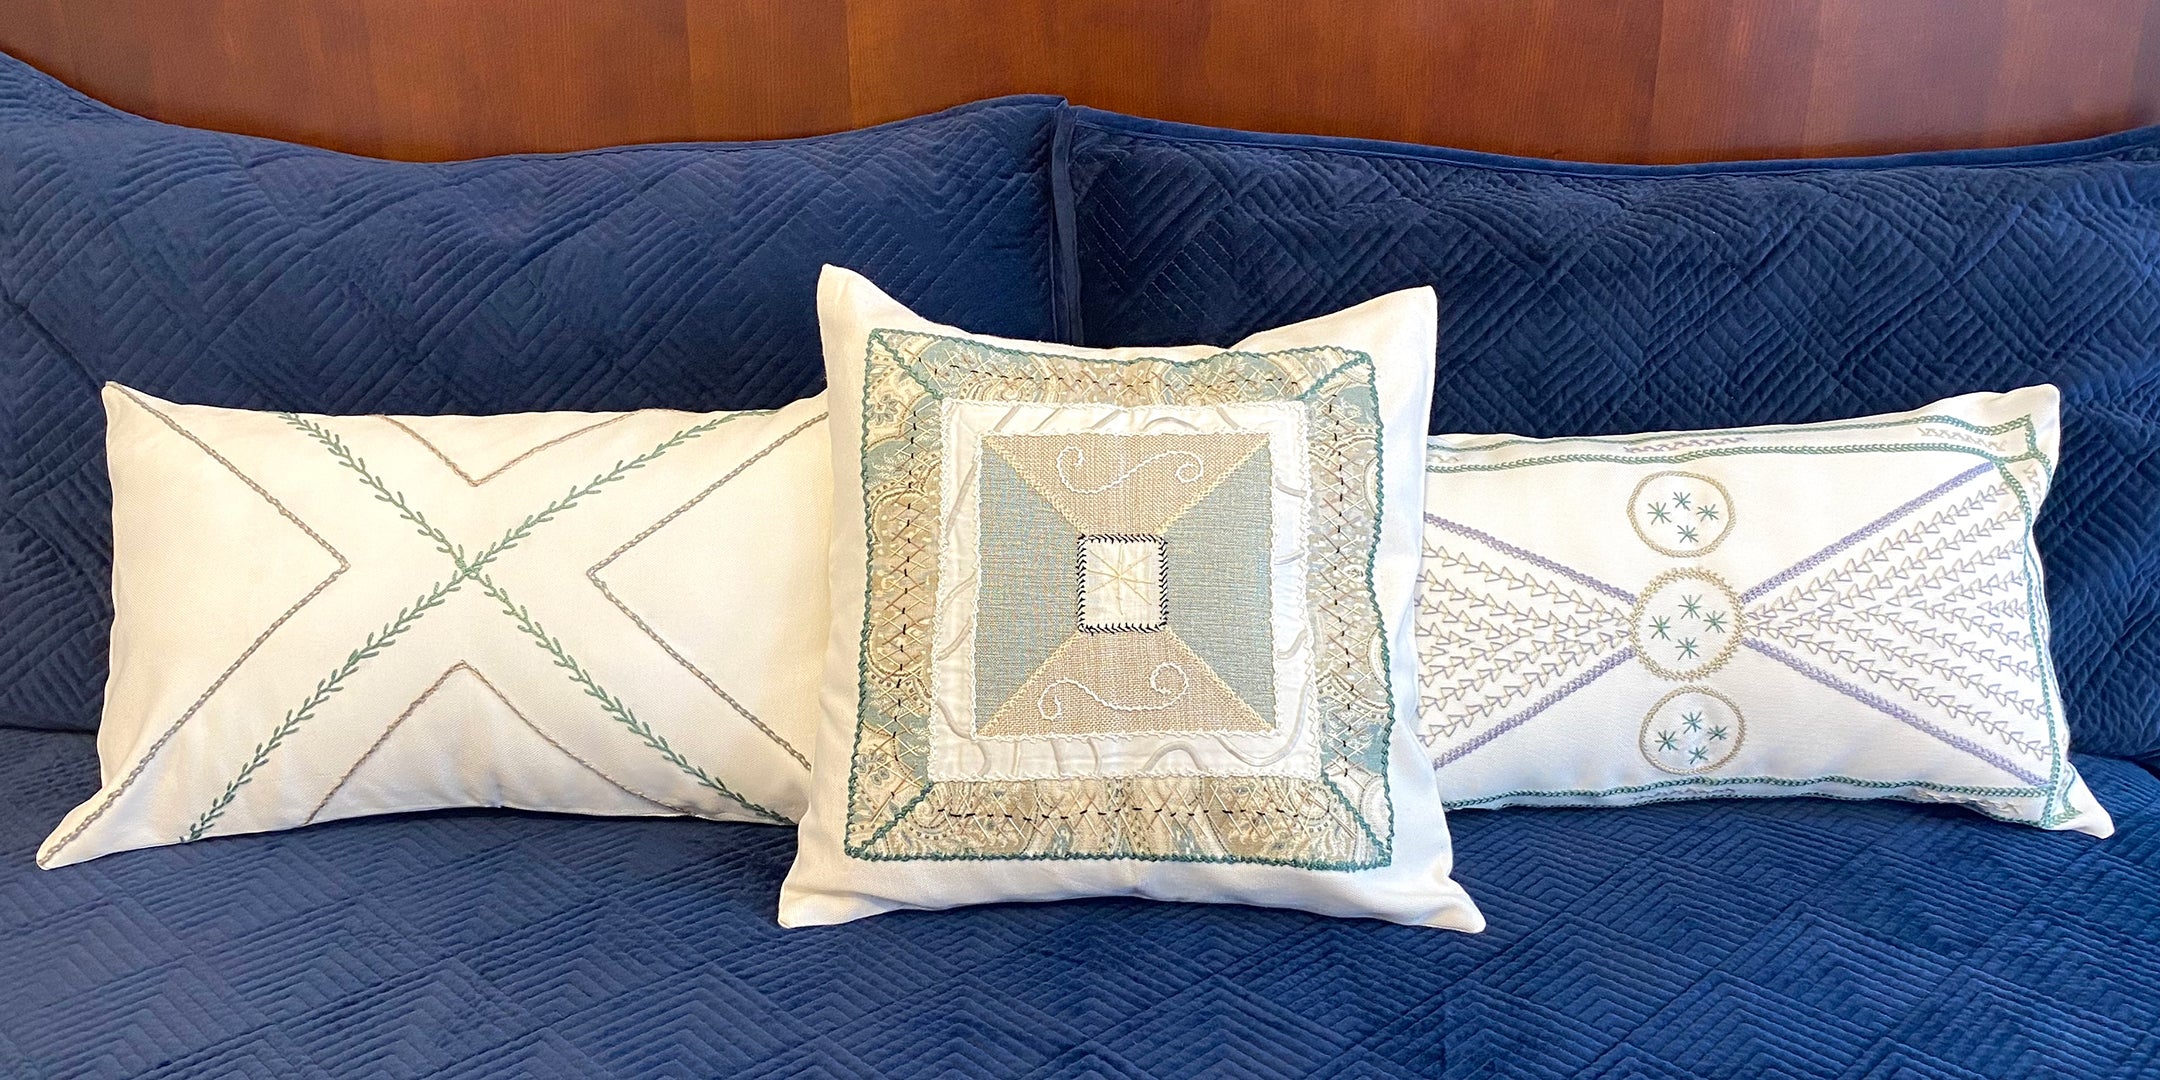 Beautiful hand-embroidered geometric pillows for a good cause!